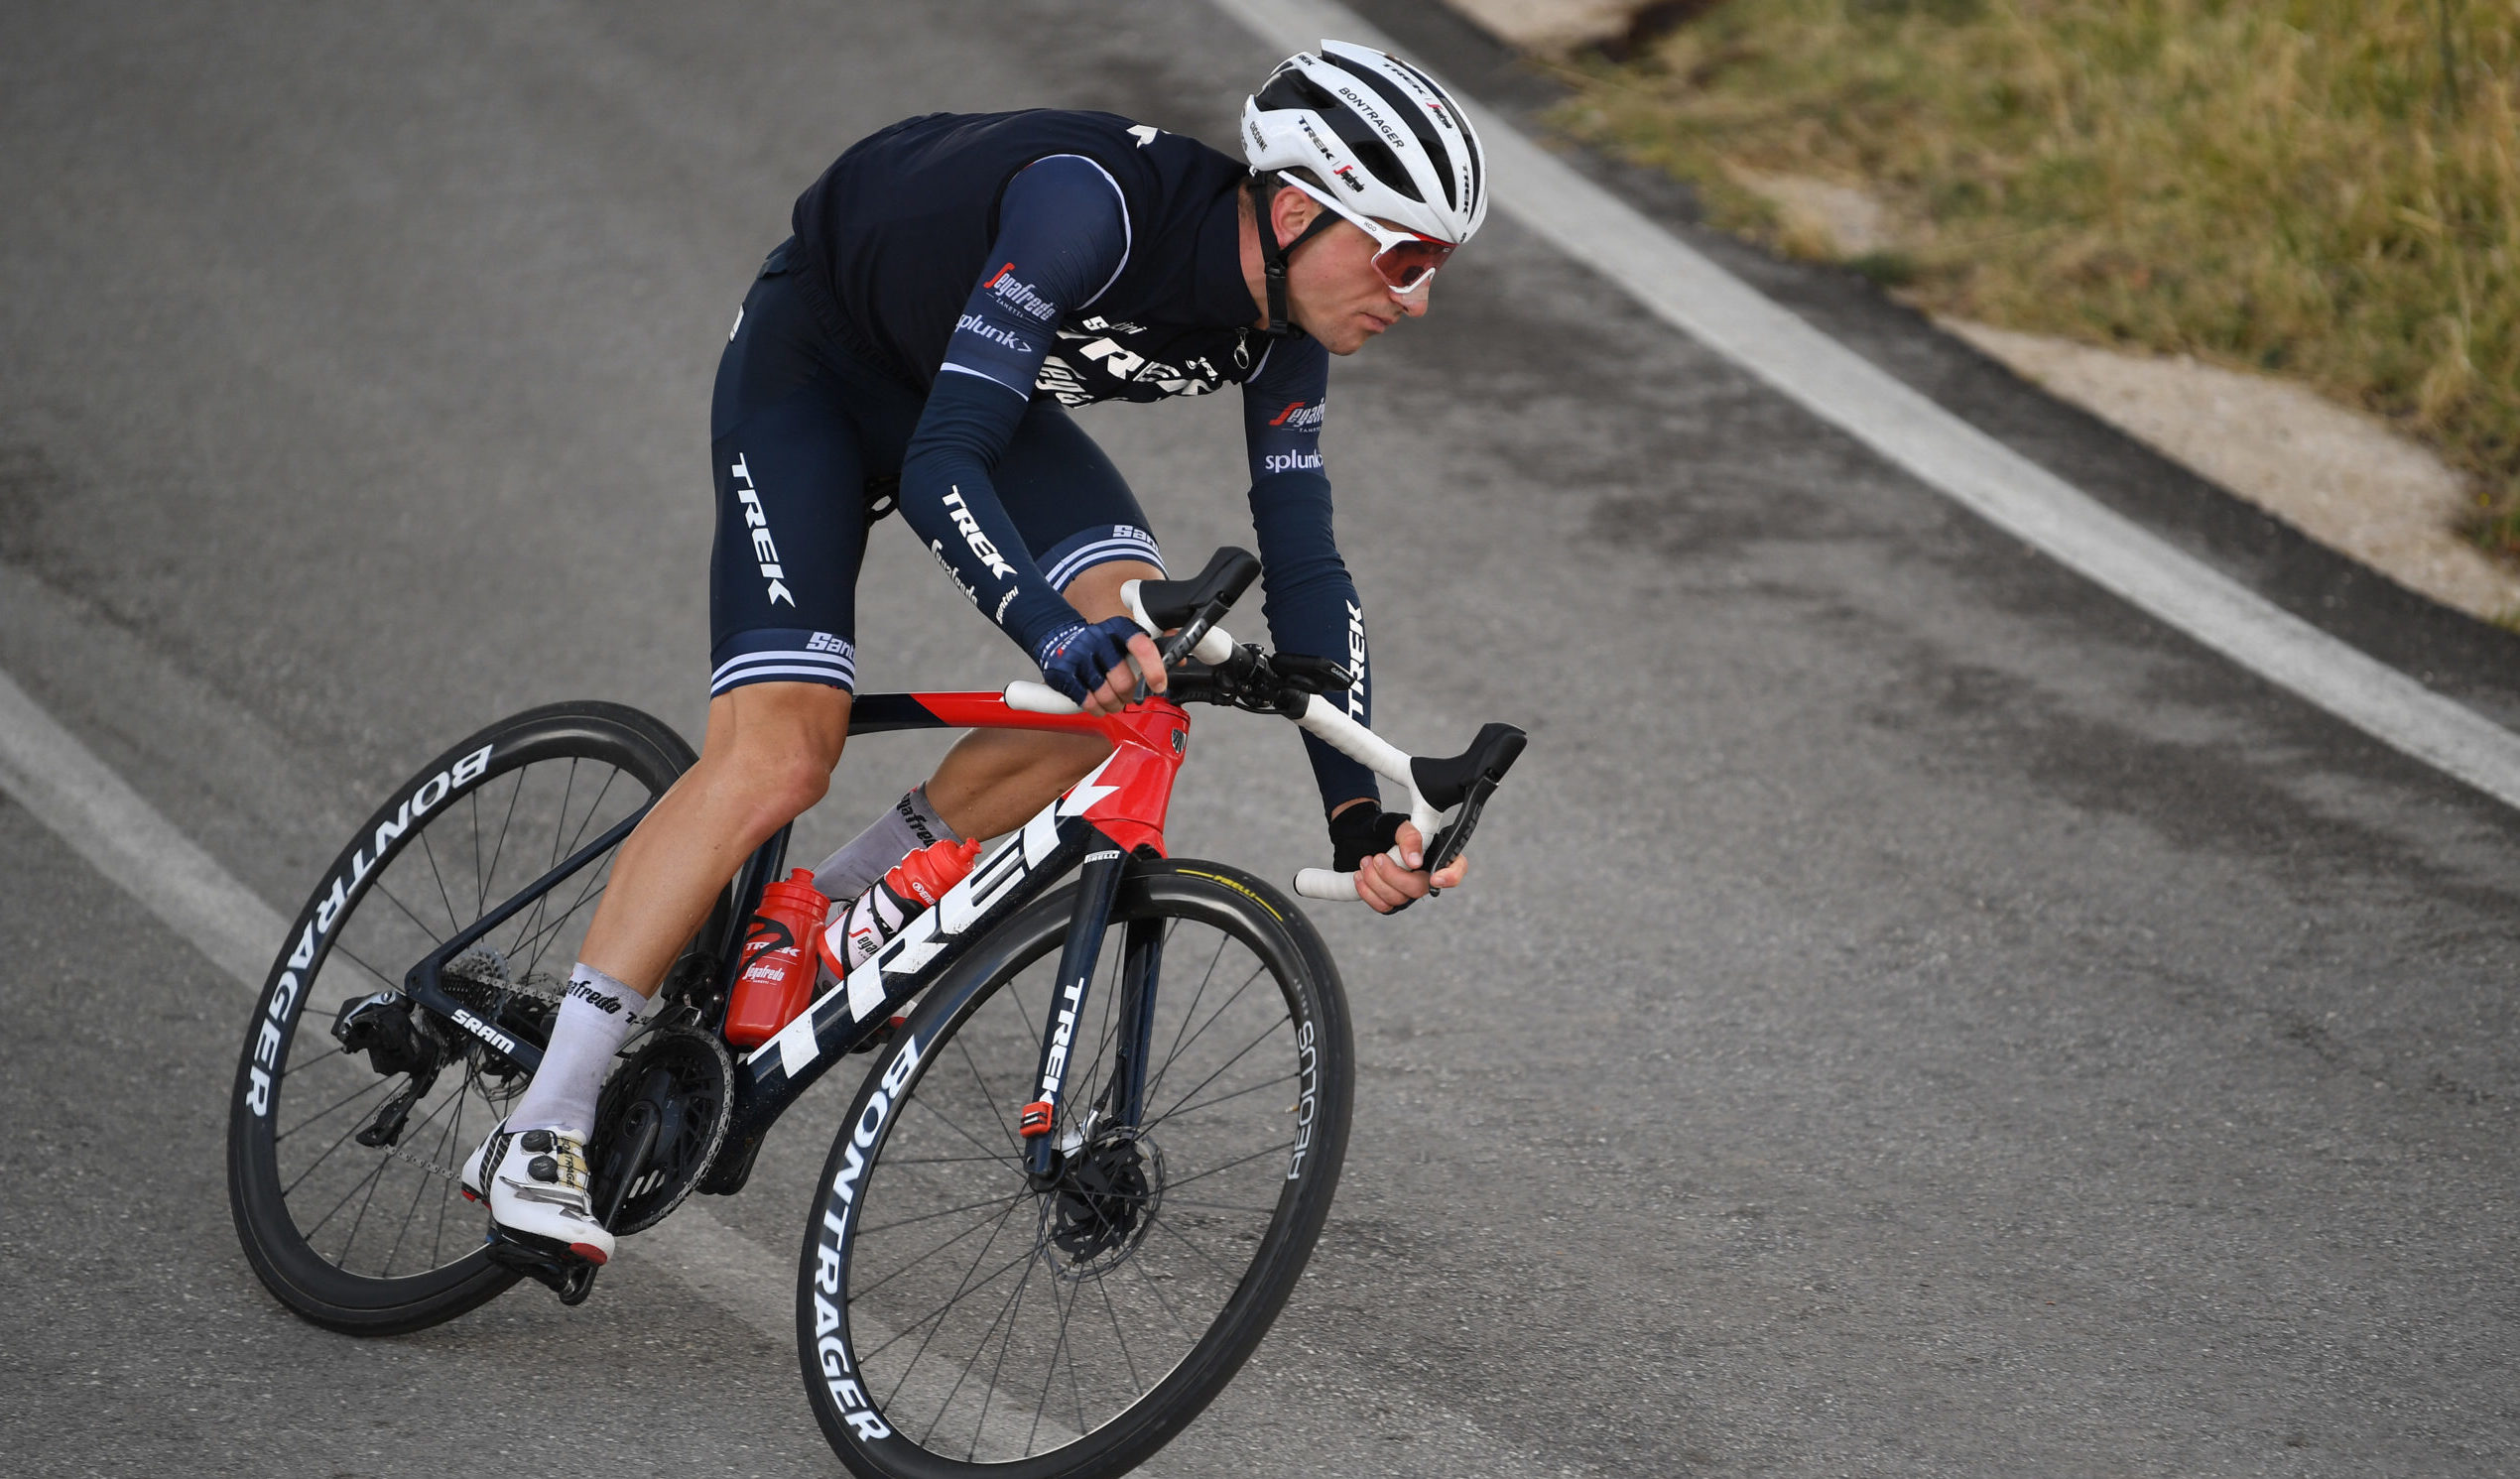 Ciccone ready to kick off ‘most significant’ season | Trek Race Shop